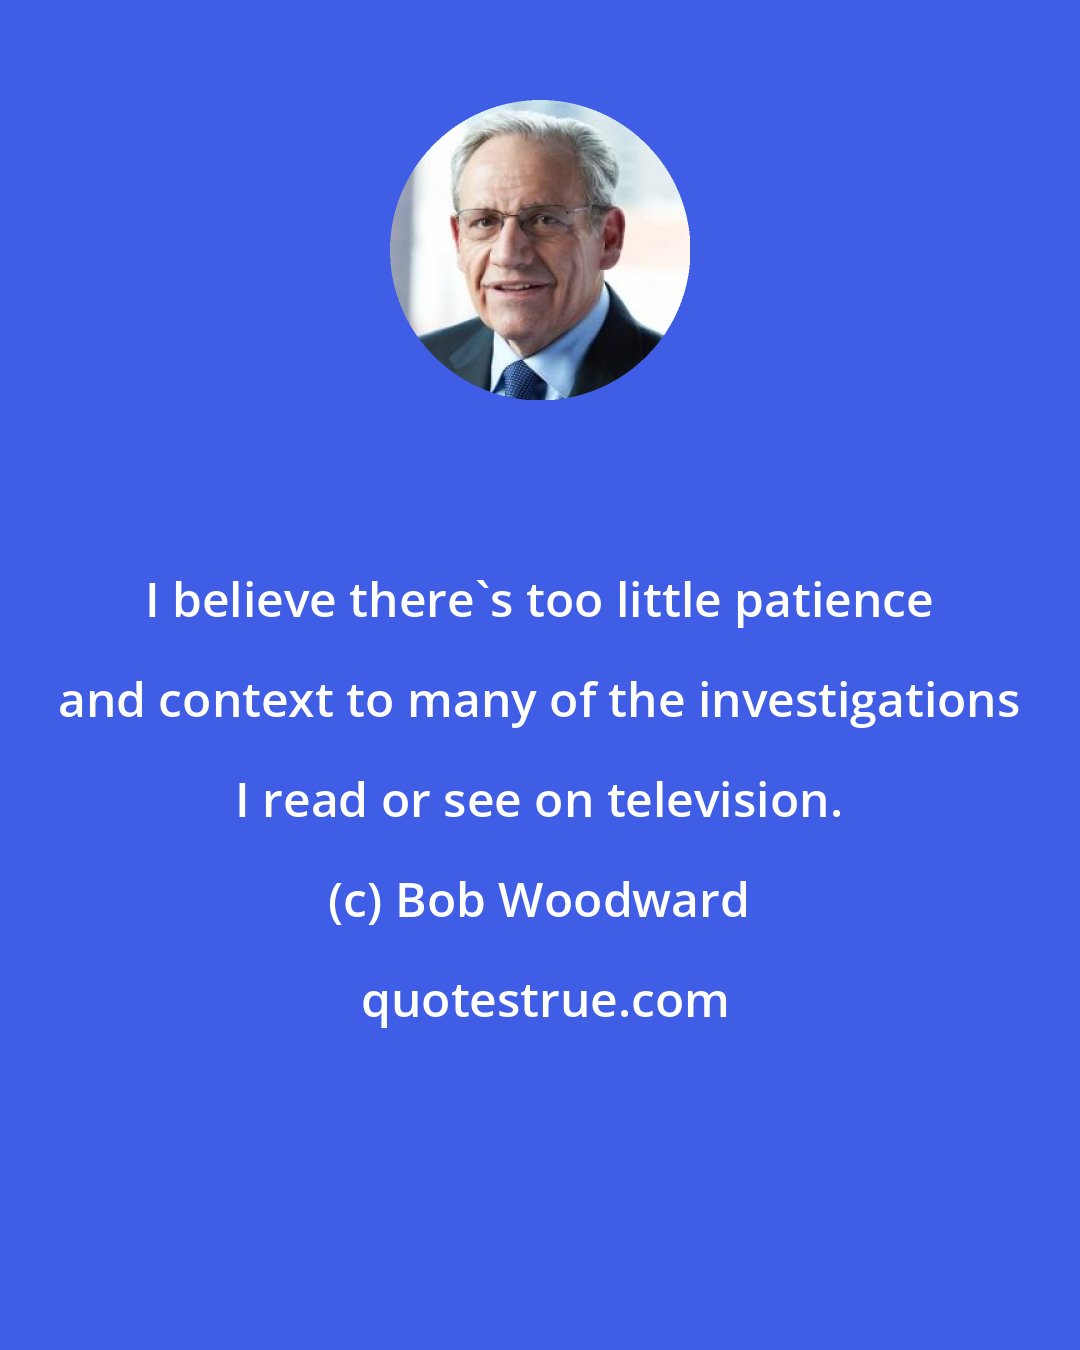 Bob Woodward: I believe there's too little patience and context to many of the investigations I read or see on television.